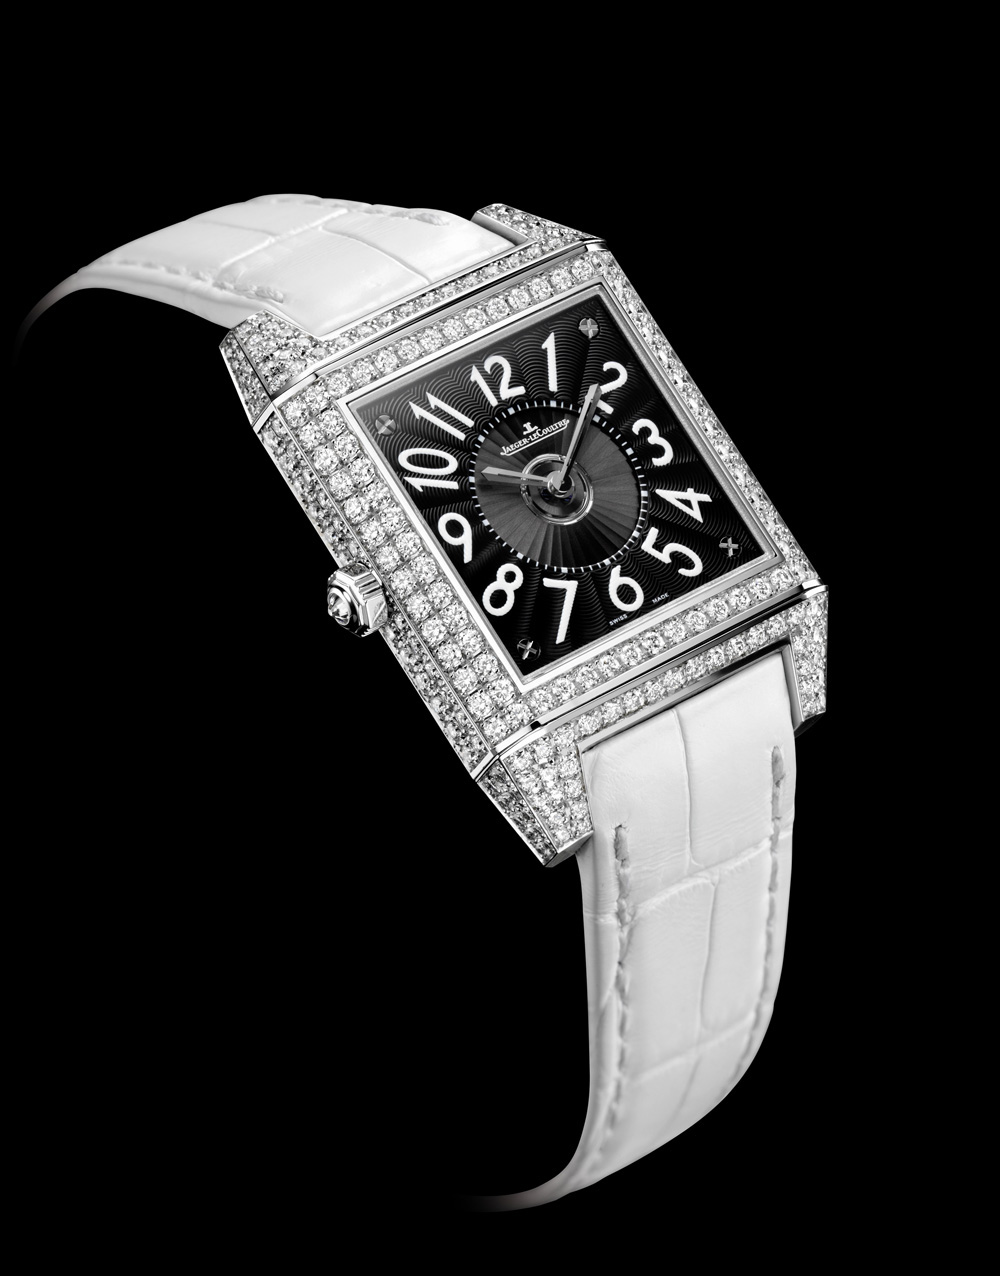 Jaeger-LeCoultre, more than 175 years of expertise